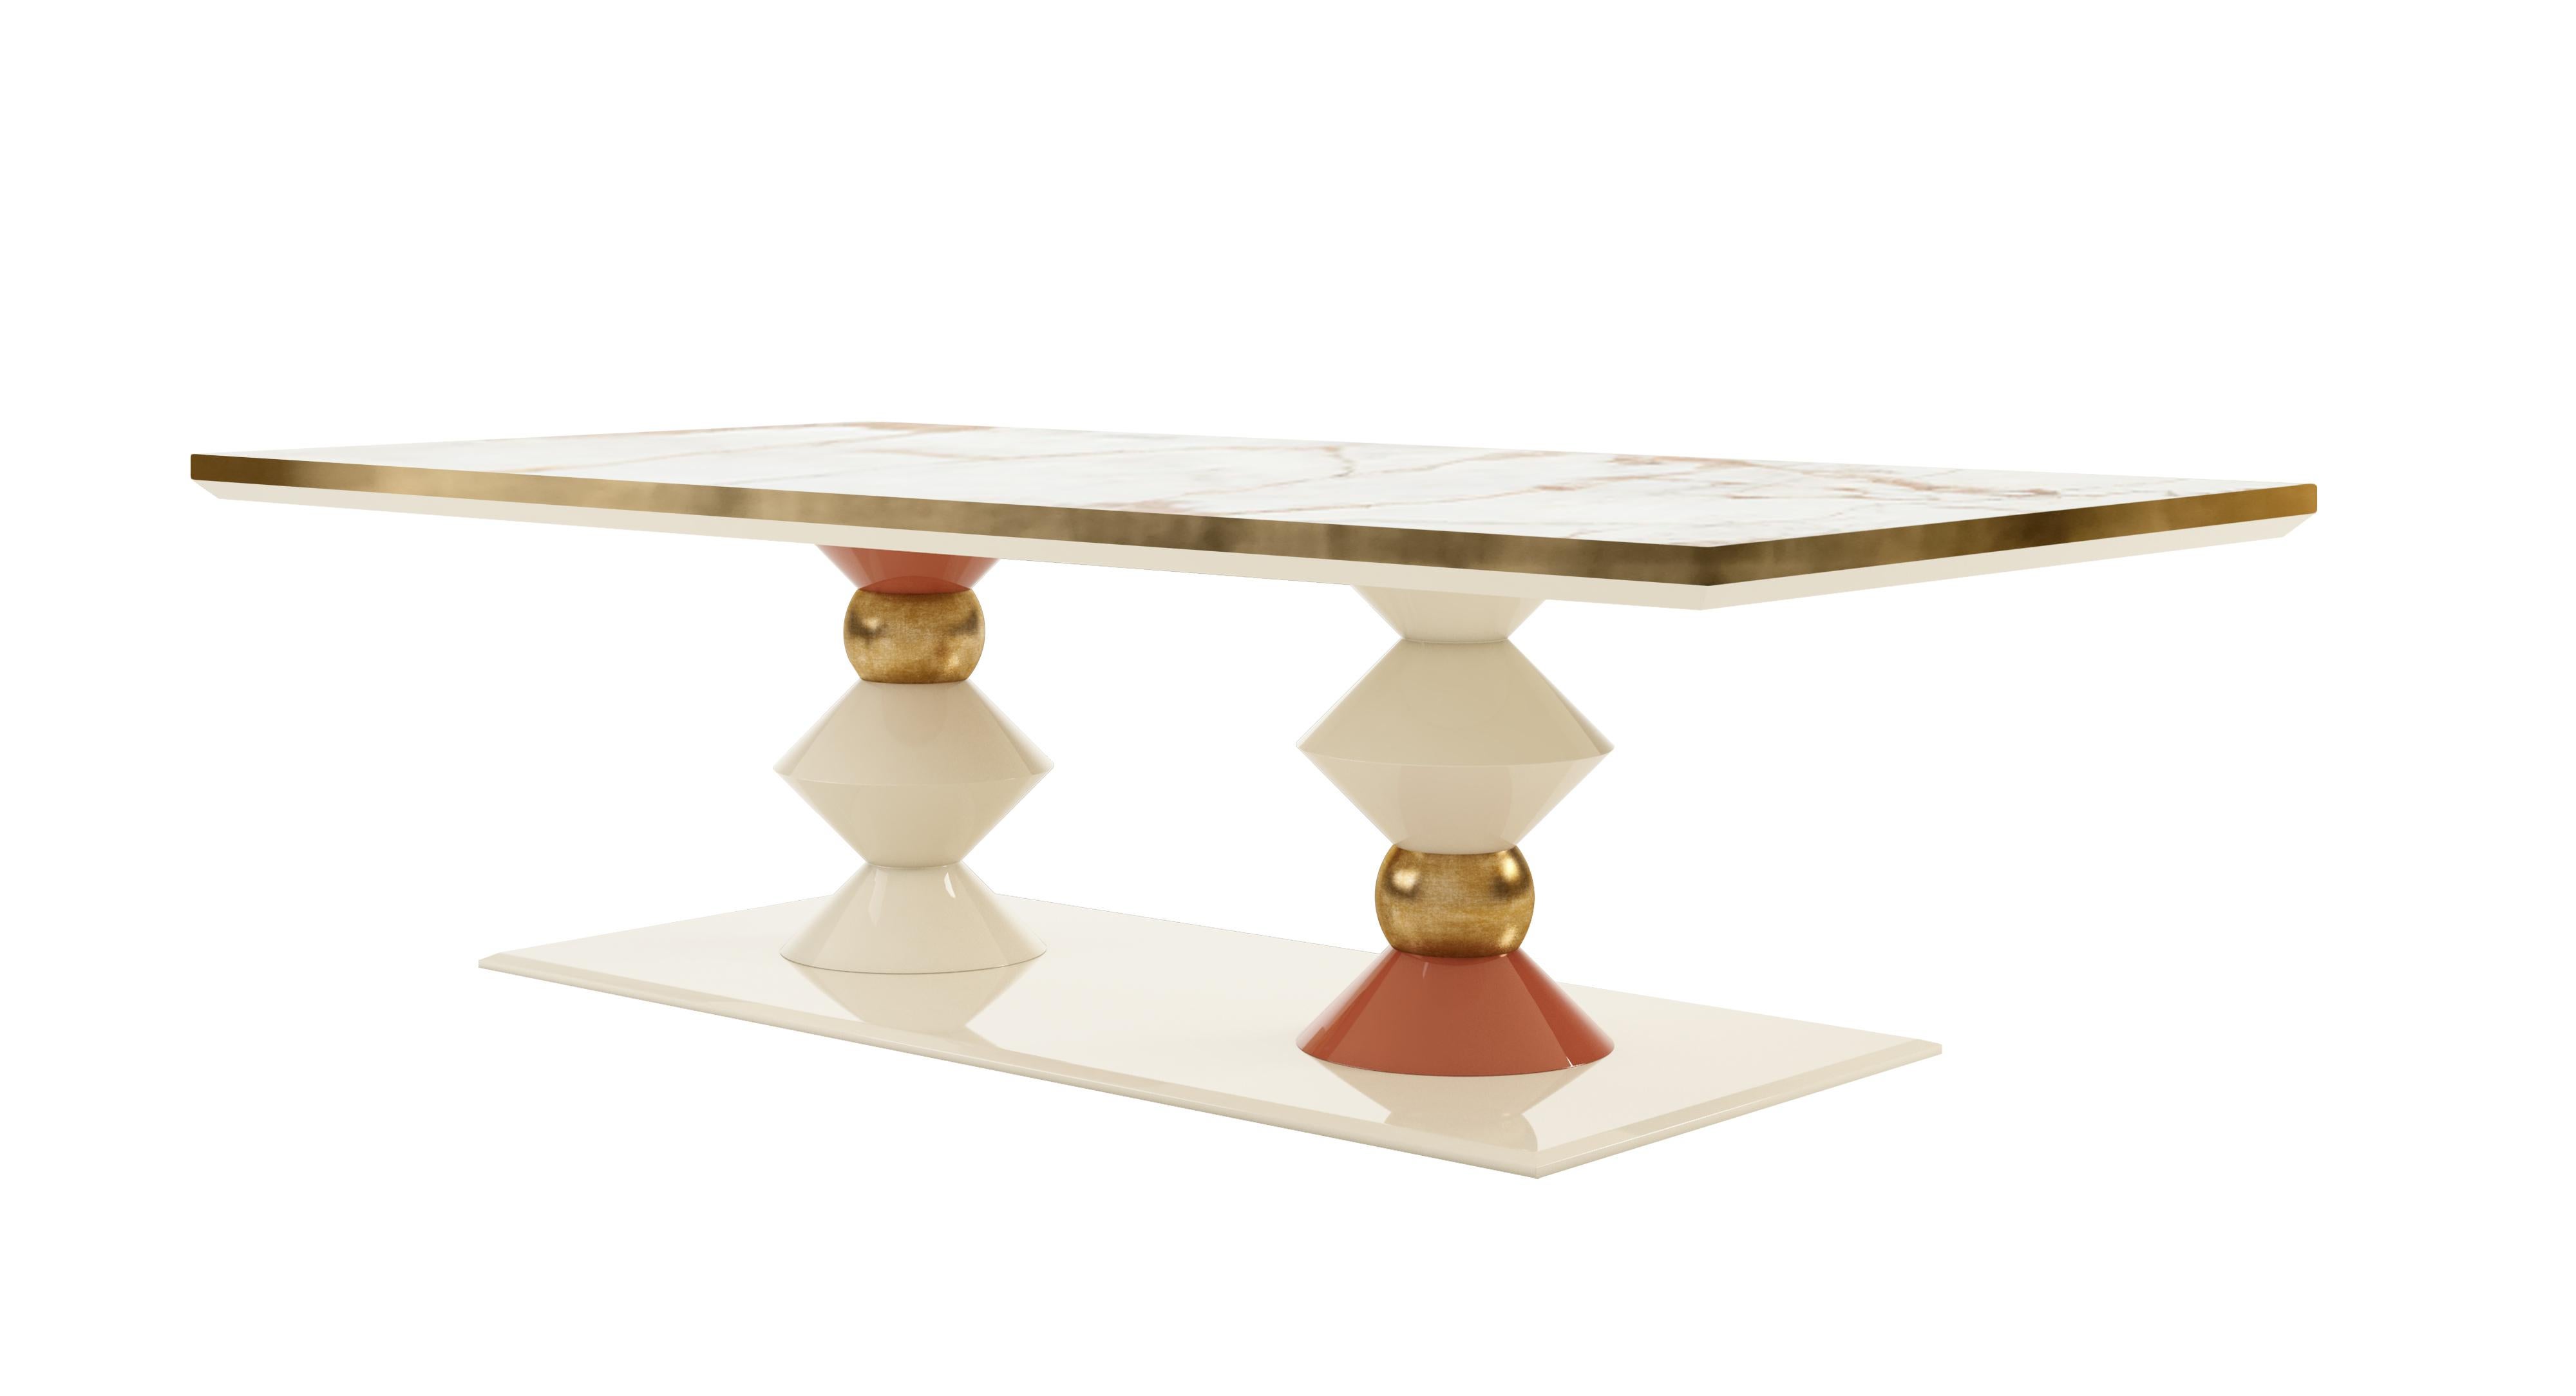 Elegantly described as the bastion of Portuguese luxury, the sophisticated Cortez Dining Table exhales the splendor of the uniqueness of the kings and queens’ Era. Its timeless originality and imperial design w inspired by the Palace of Ajuda, a